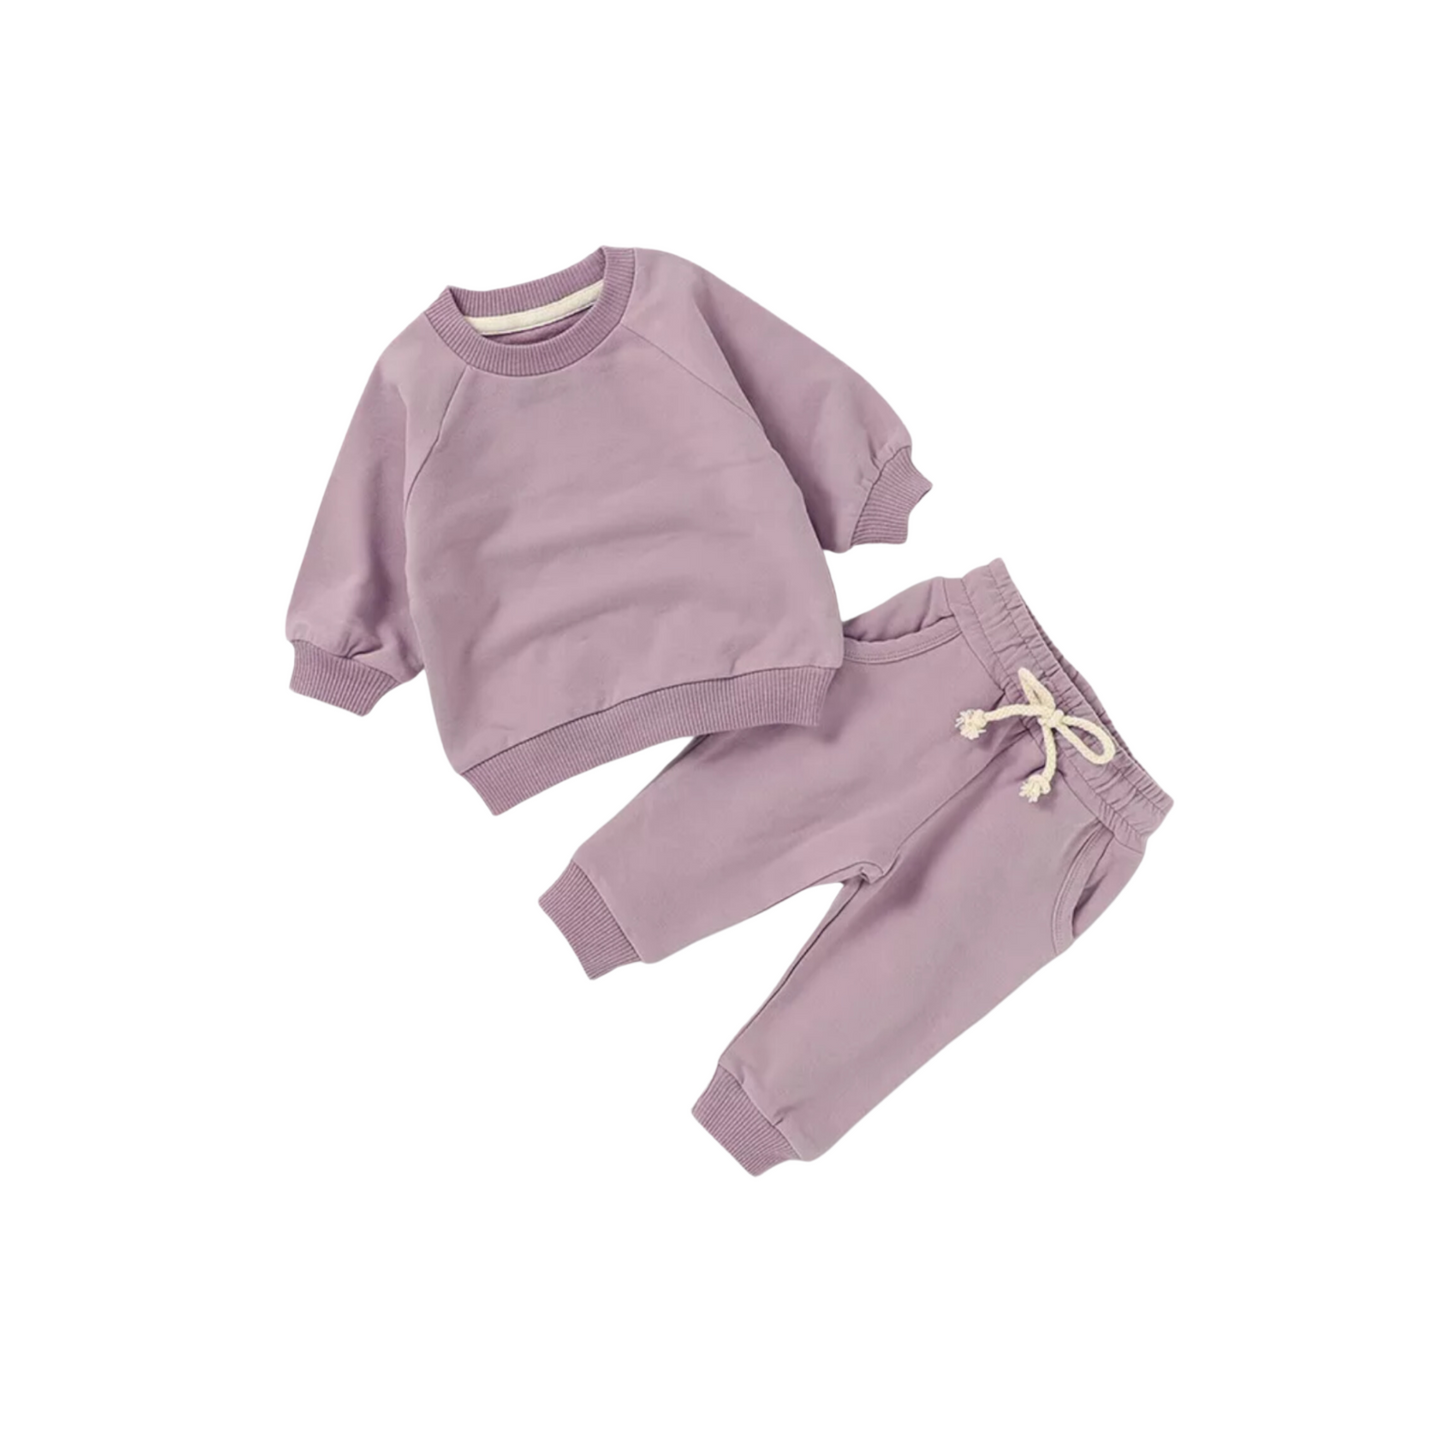 Two-piece "Love You More" Organic Sweatsuit - Lilac